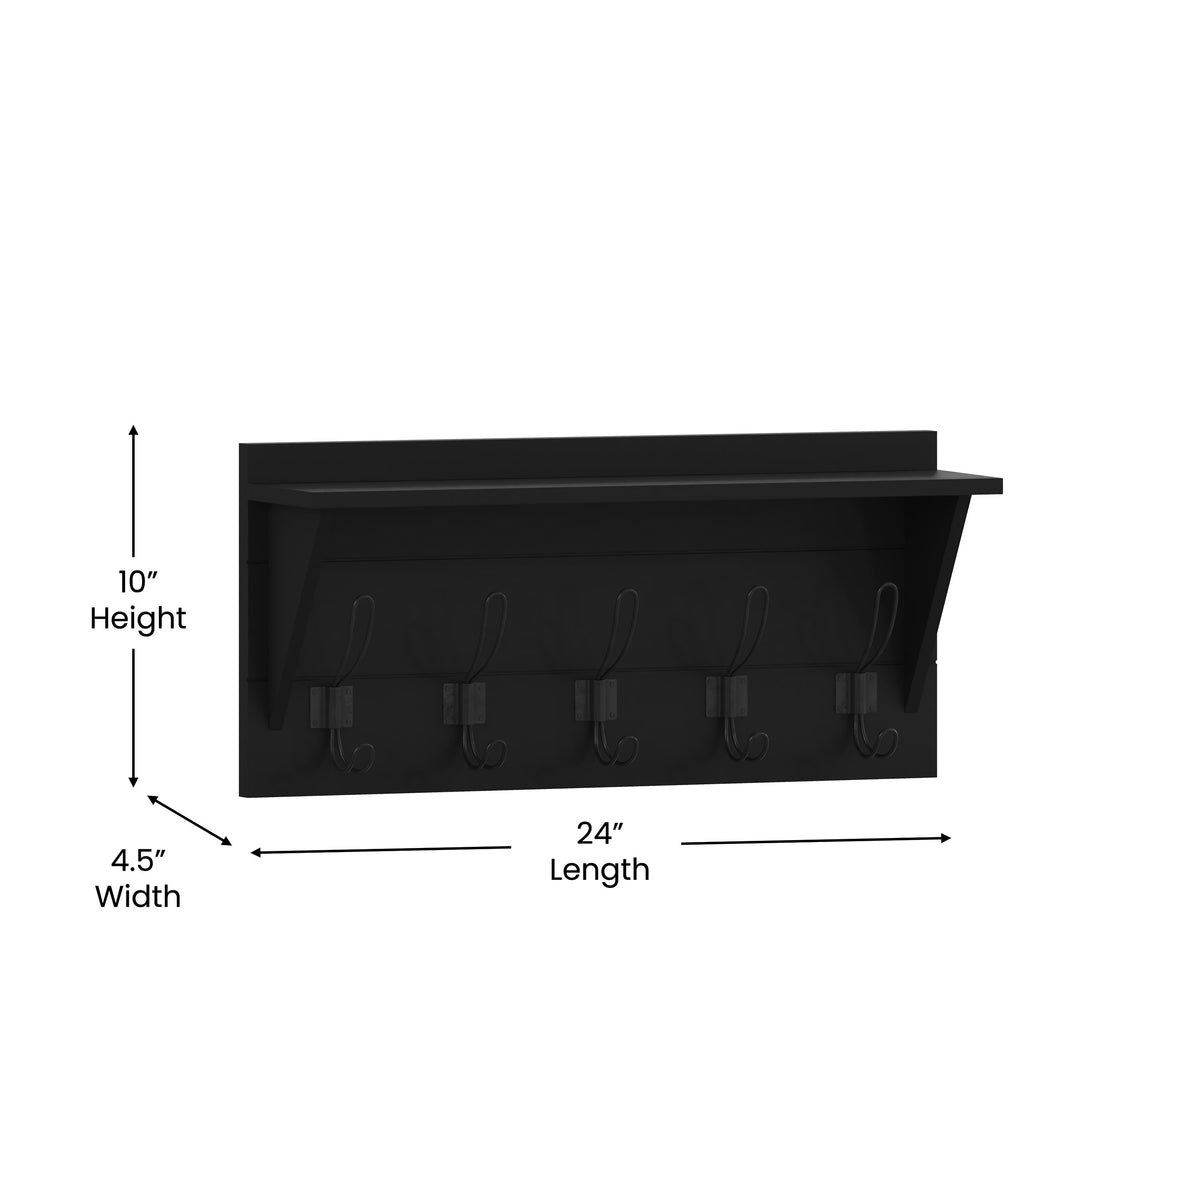 Black |#| Wall Mounted Coat Rack with Upper Shelf and Coat Hooks in Black Finish